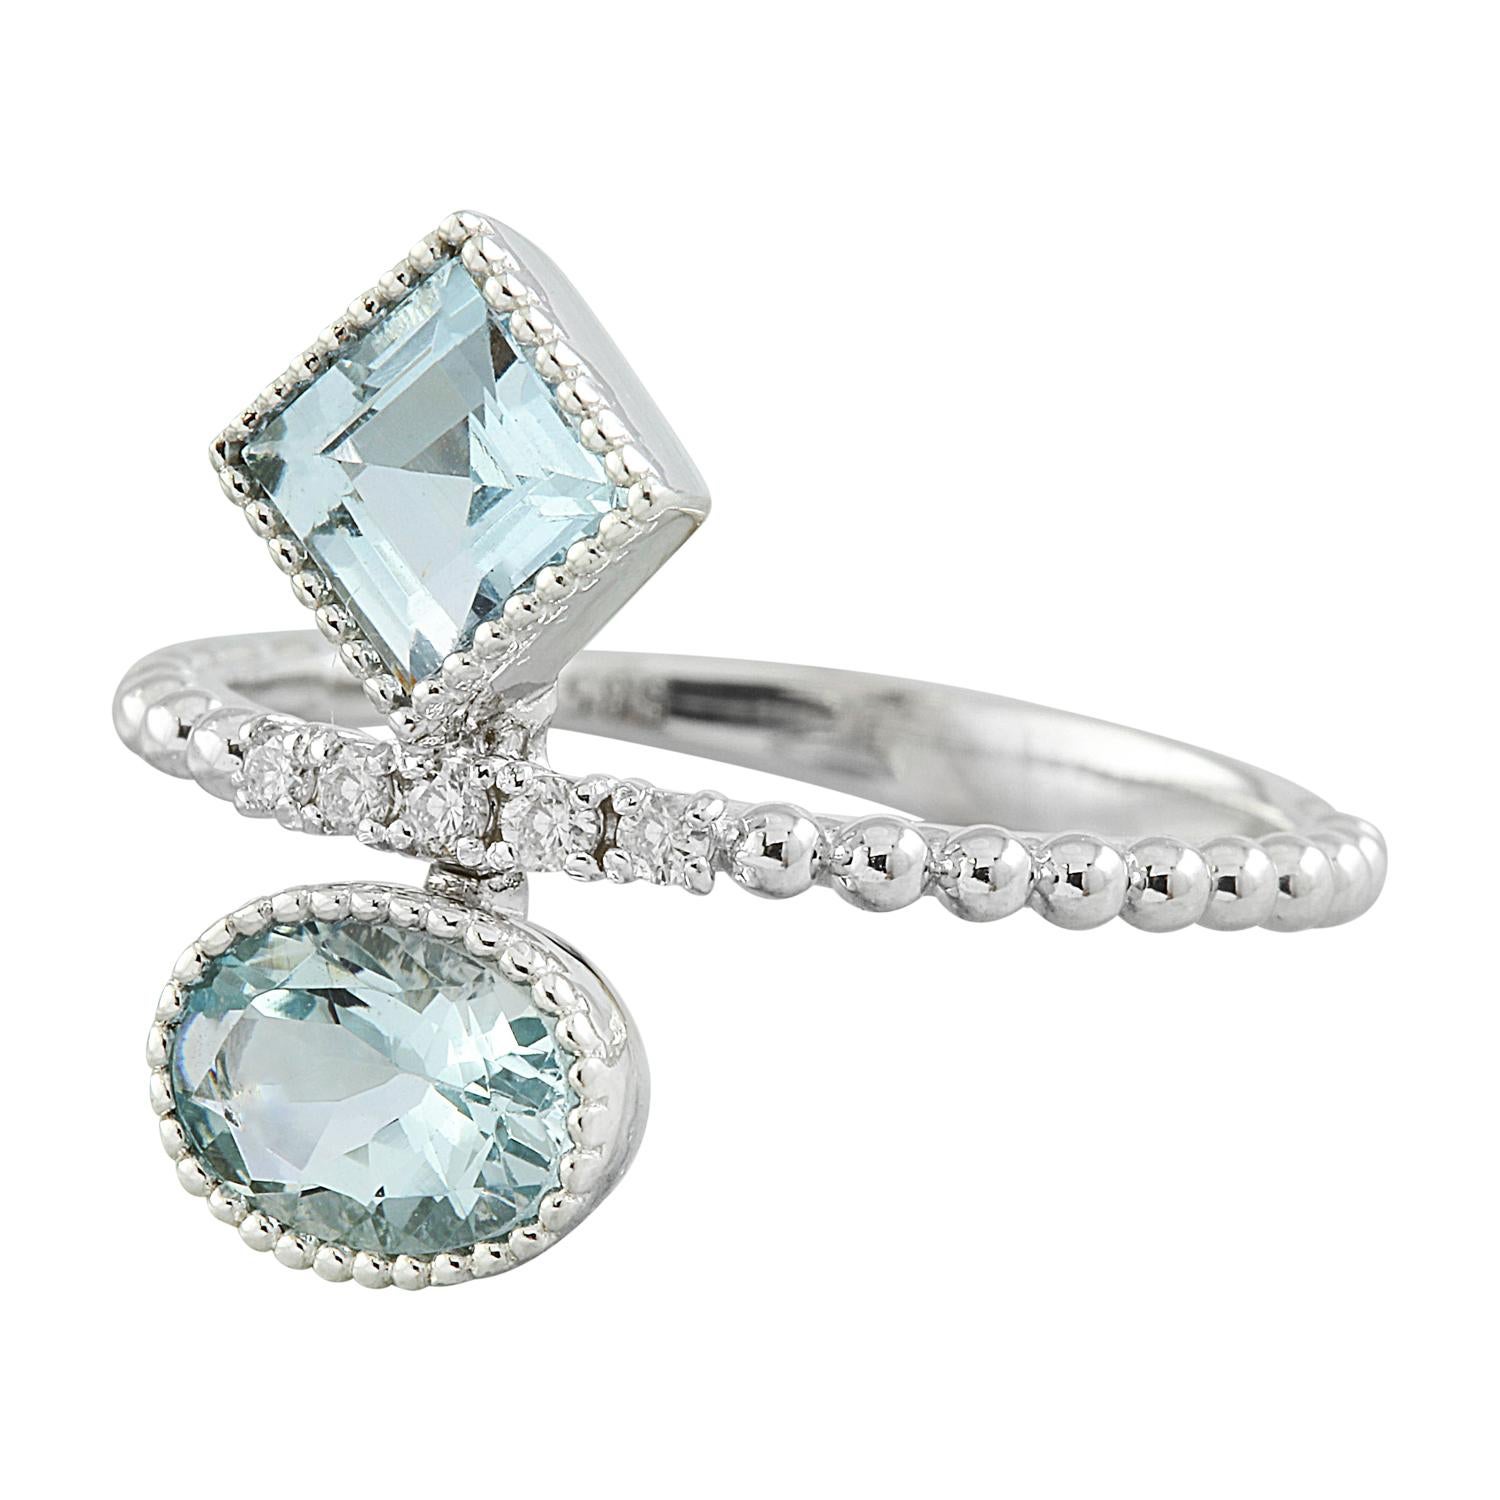 Introducing a breathtaking masterpiece of elegance and sophistication - the 1.31 Carat Natural Aquamarine 14K Solid White Gold Diamond Ring, meticulously crafted to captivate hearts and minds.

This ring is designed for a ring size 7 and boasts a